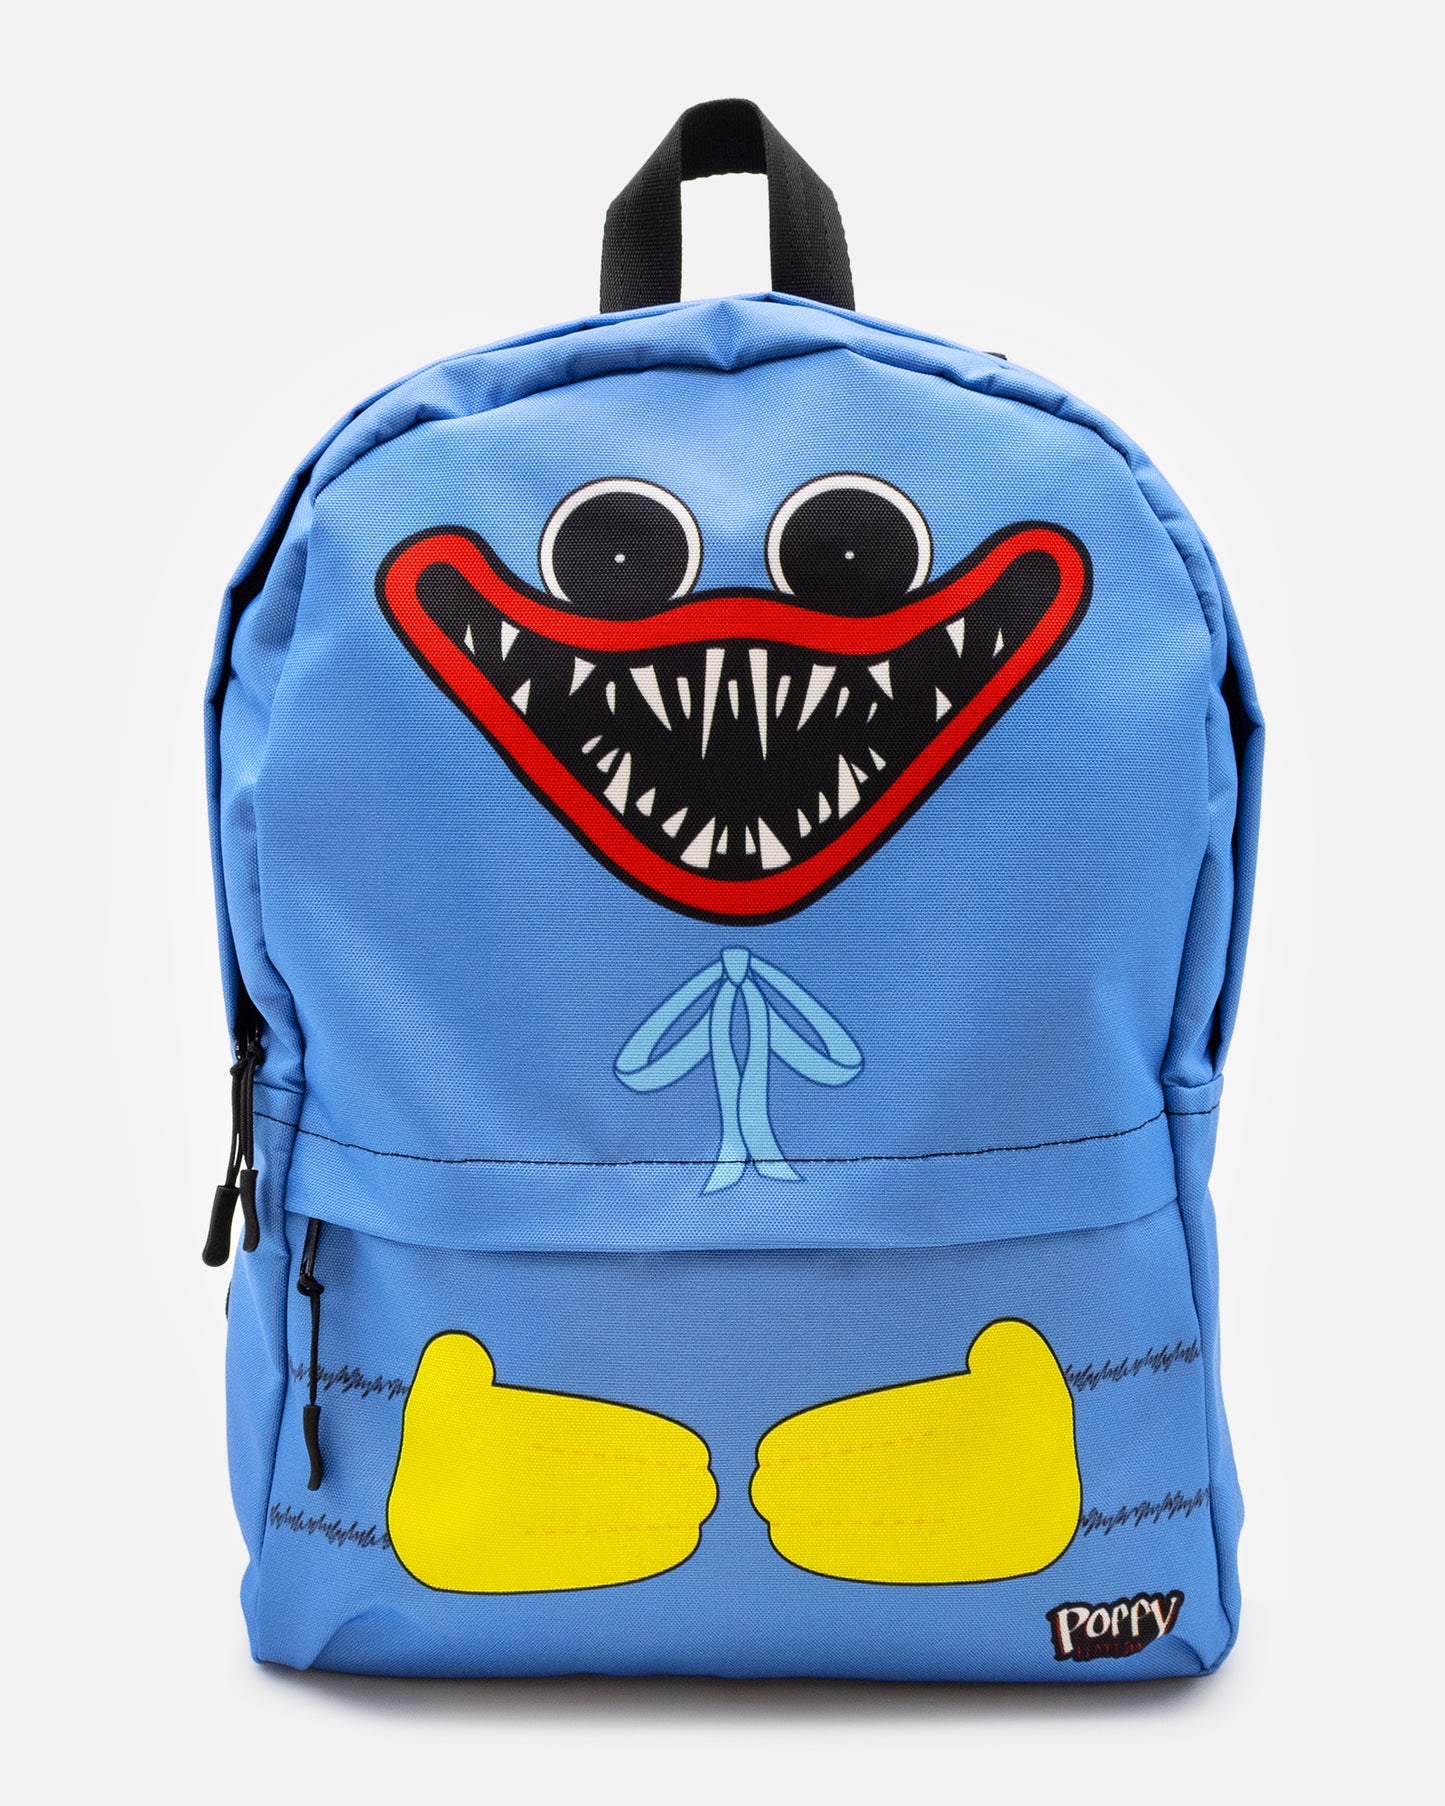 boxy boo backpack front. image on top portion: plhuggy wuggy face backpack. image on top portion: huggy wuggy's evil smiling face with bow. image on bottom portion: huggy wuggy's arms and hands. text: poppy playtime